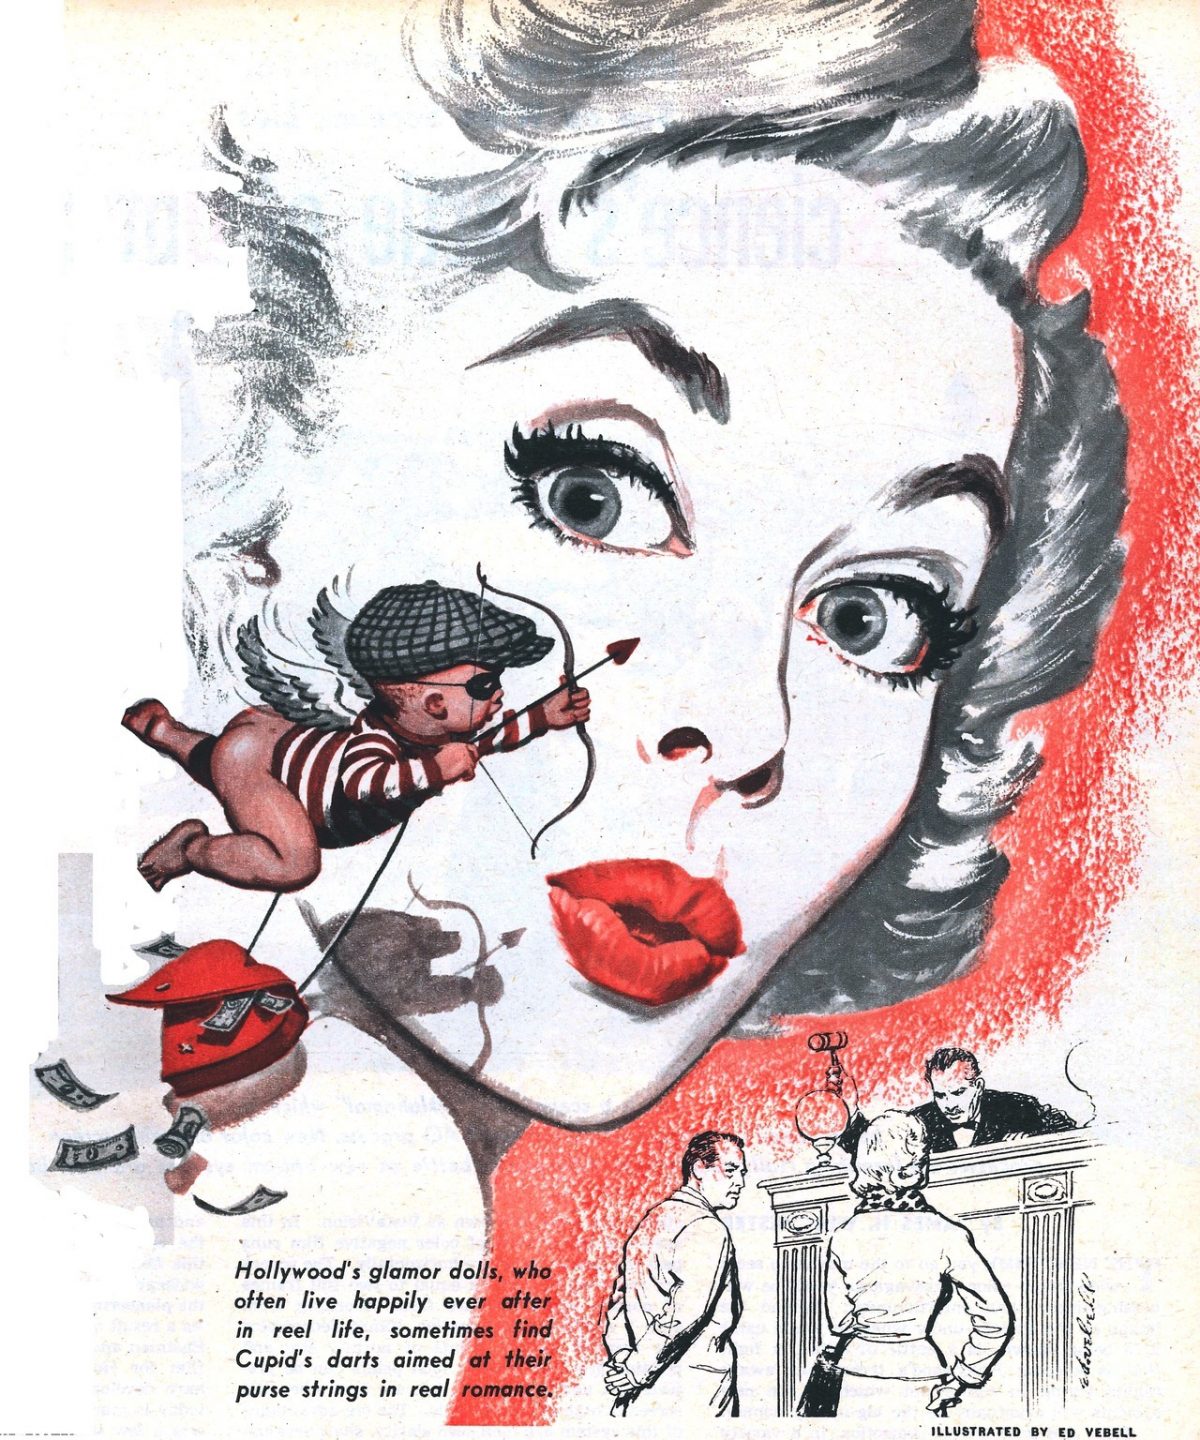 Sunday Mirror Magazine feature, “It’s The Woman Who Pays – A Grim Reality In Hollywood.” Dec. 26, 1954. Illustration by Ed Vebell.